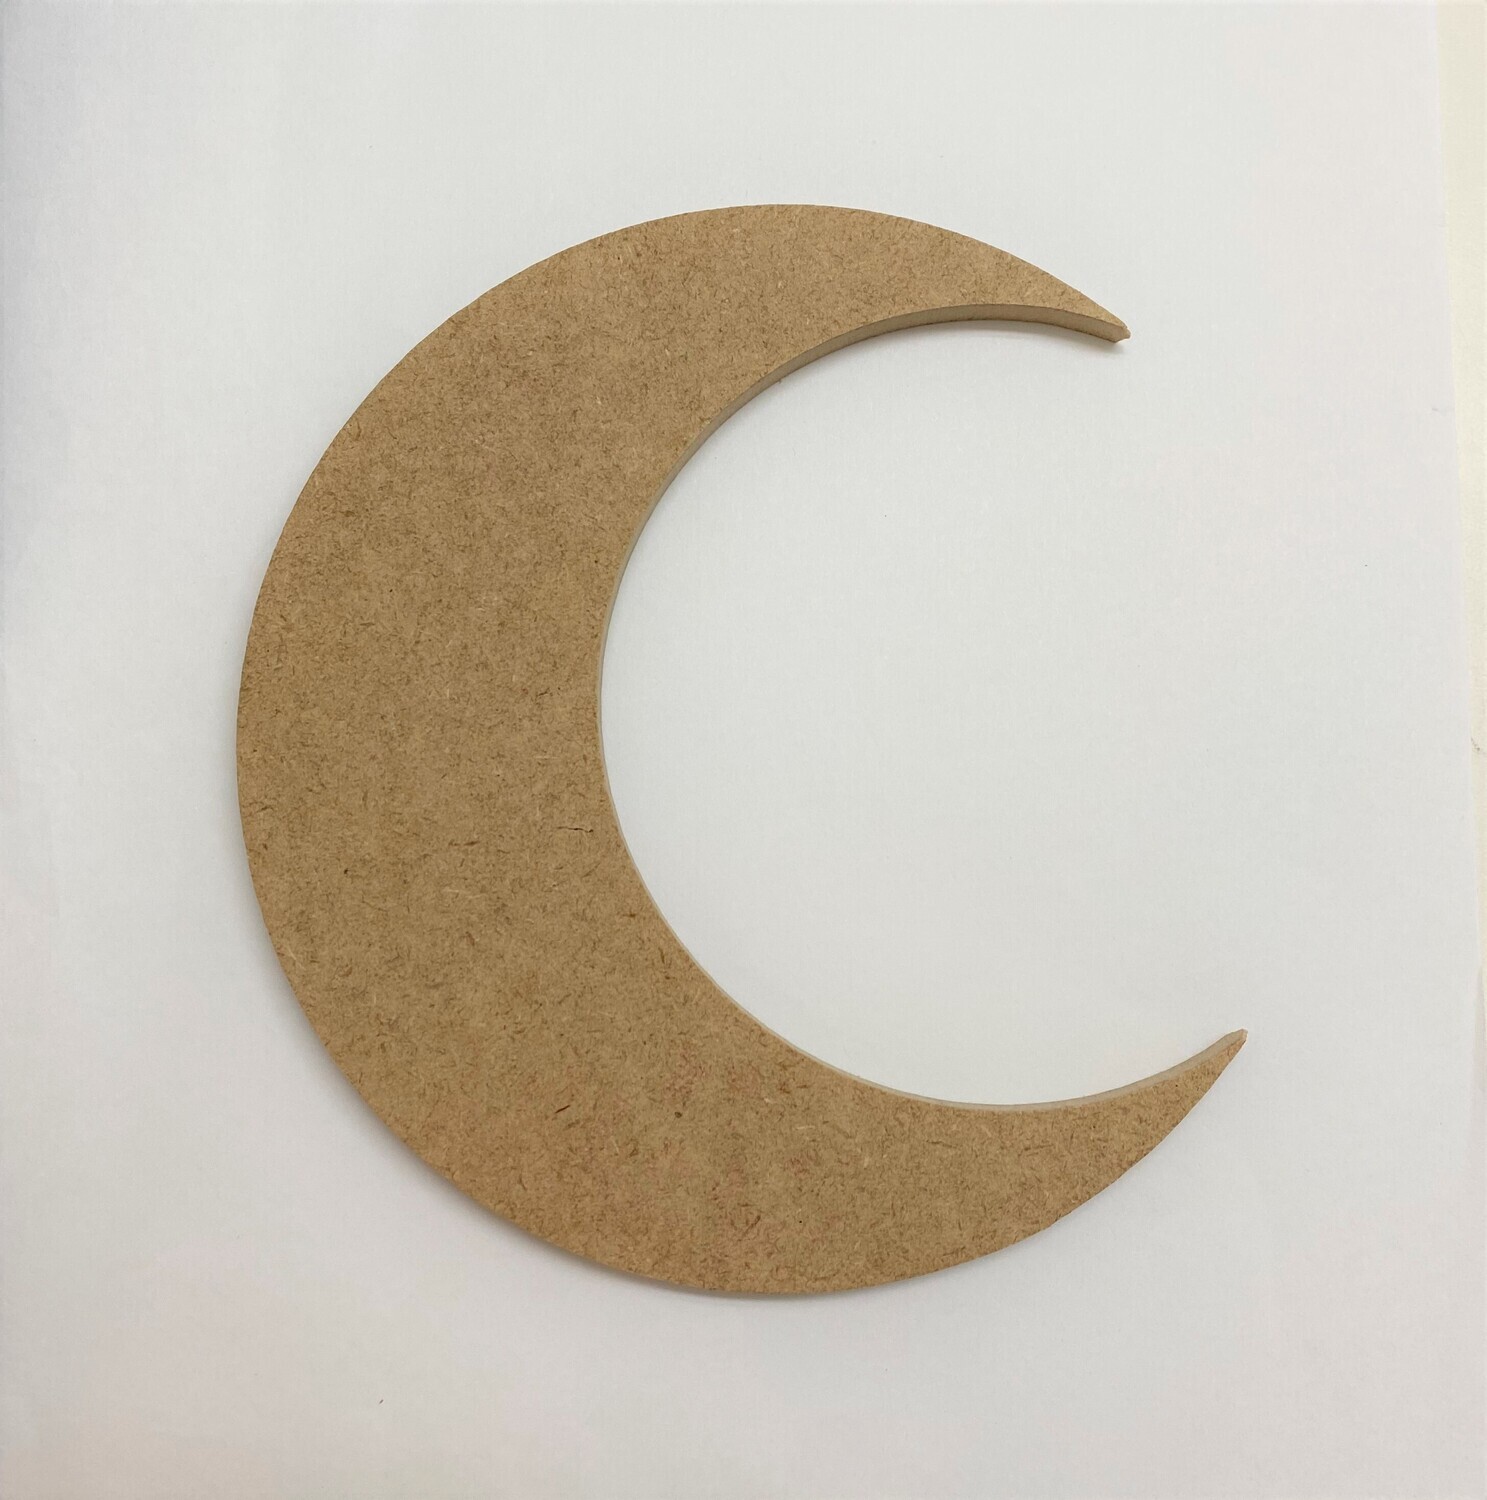 Crescent Moon 6" - 1/4" Thick MDF